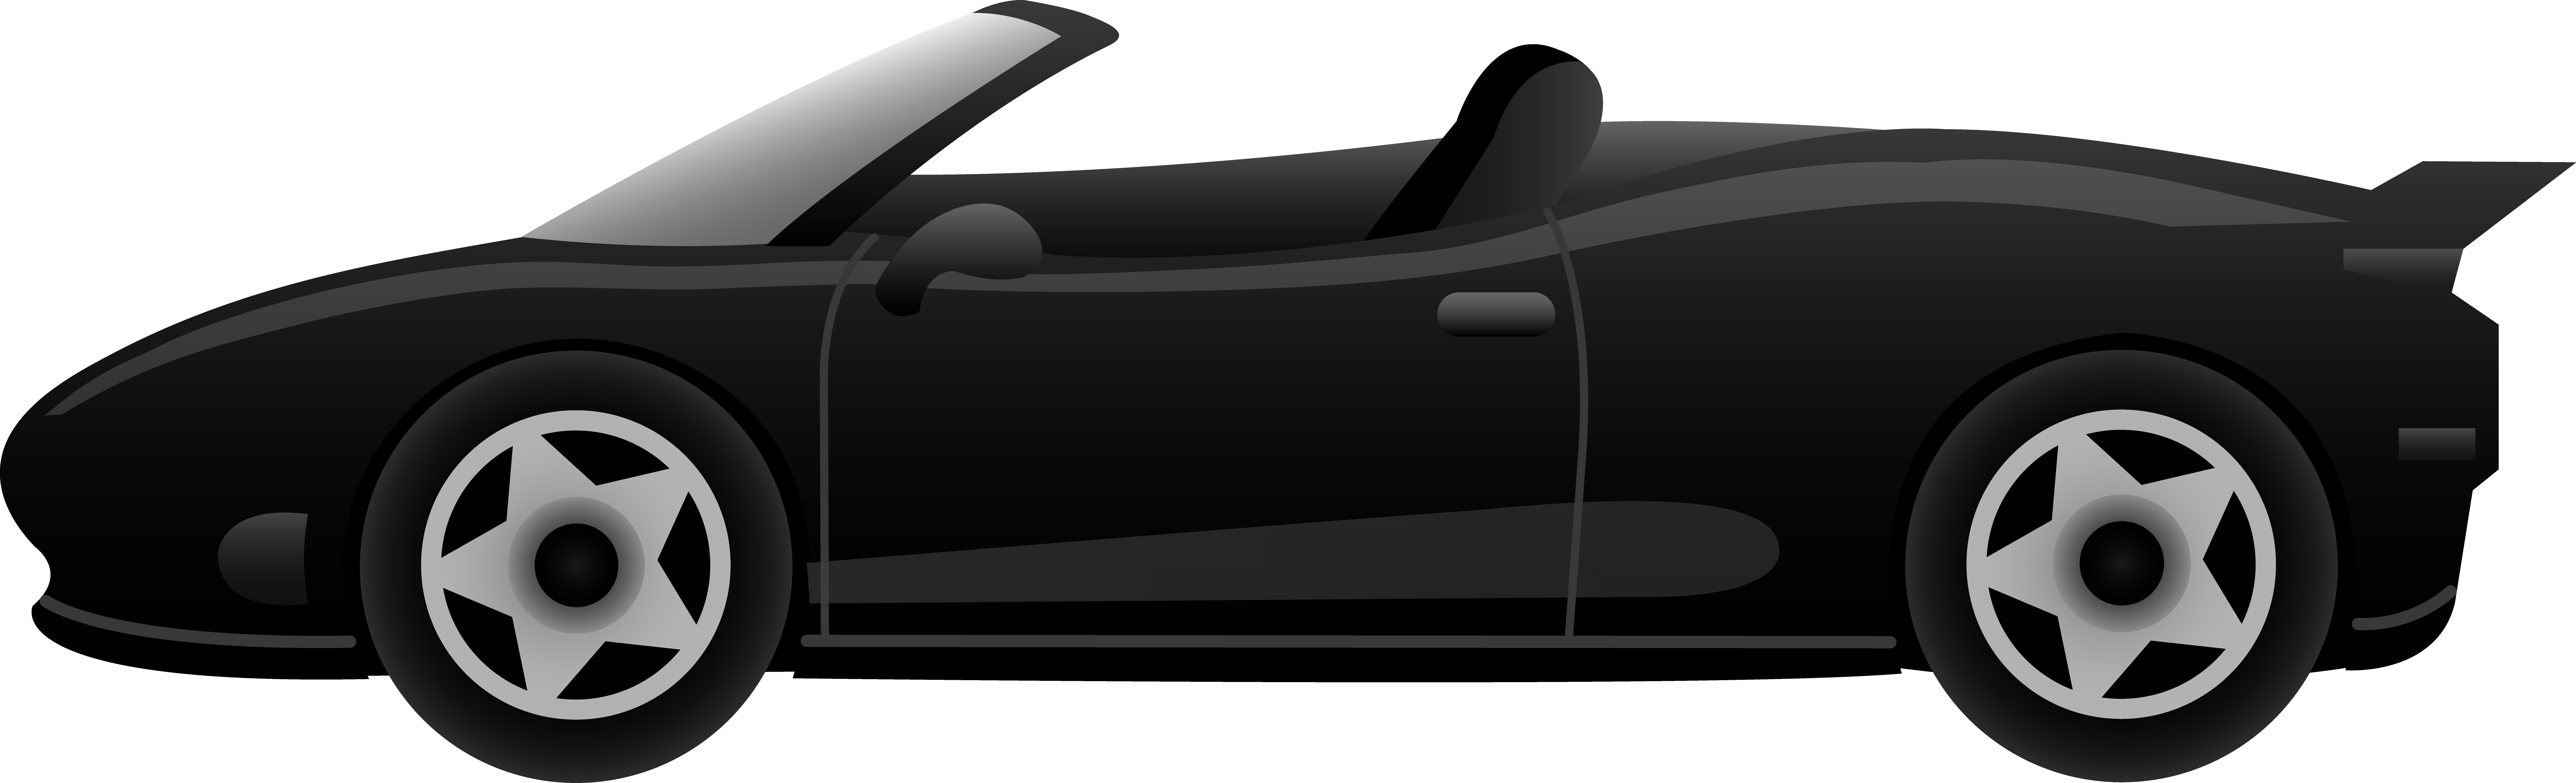 Sports car clipart side view